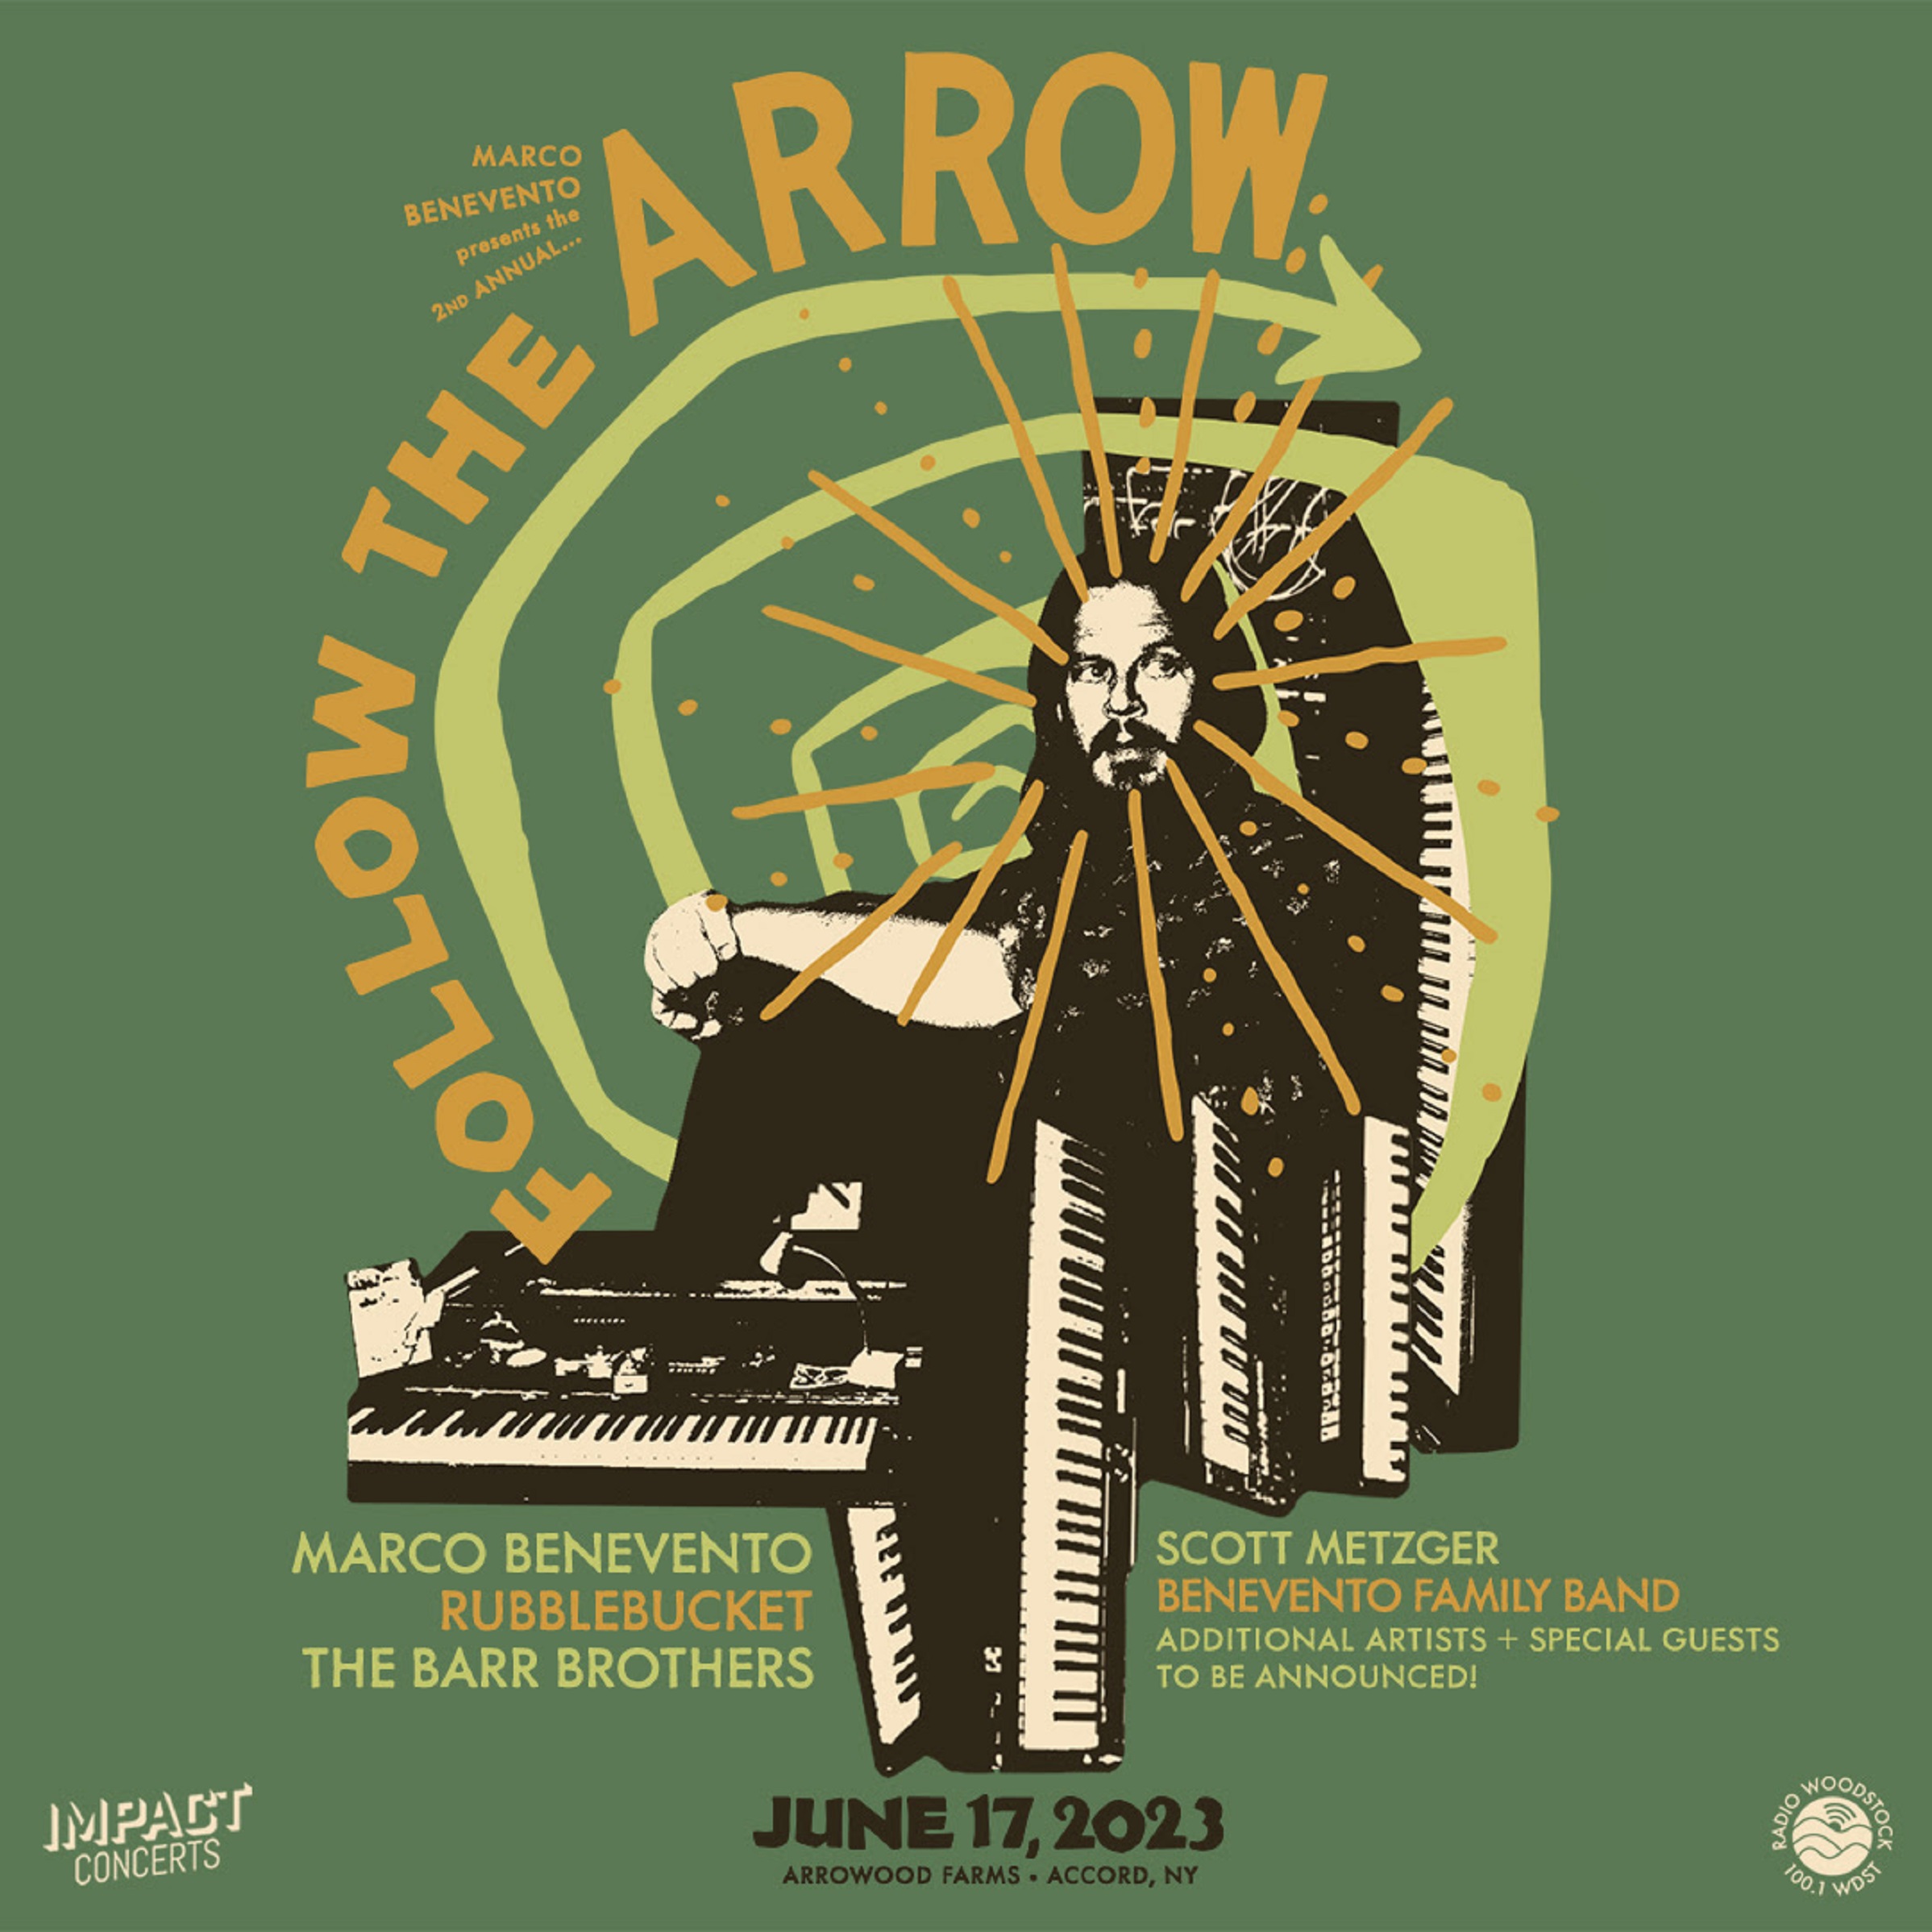 Marco Benevento Presents Follow The Arrow 2023 With Rubblebucket, The Barr Brothers & More